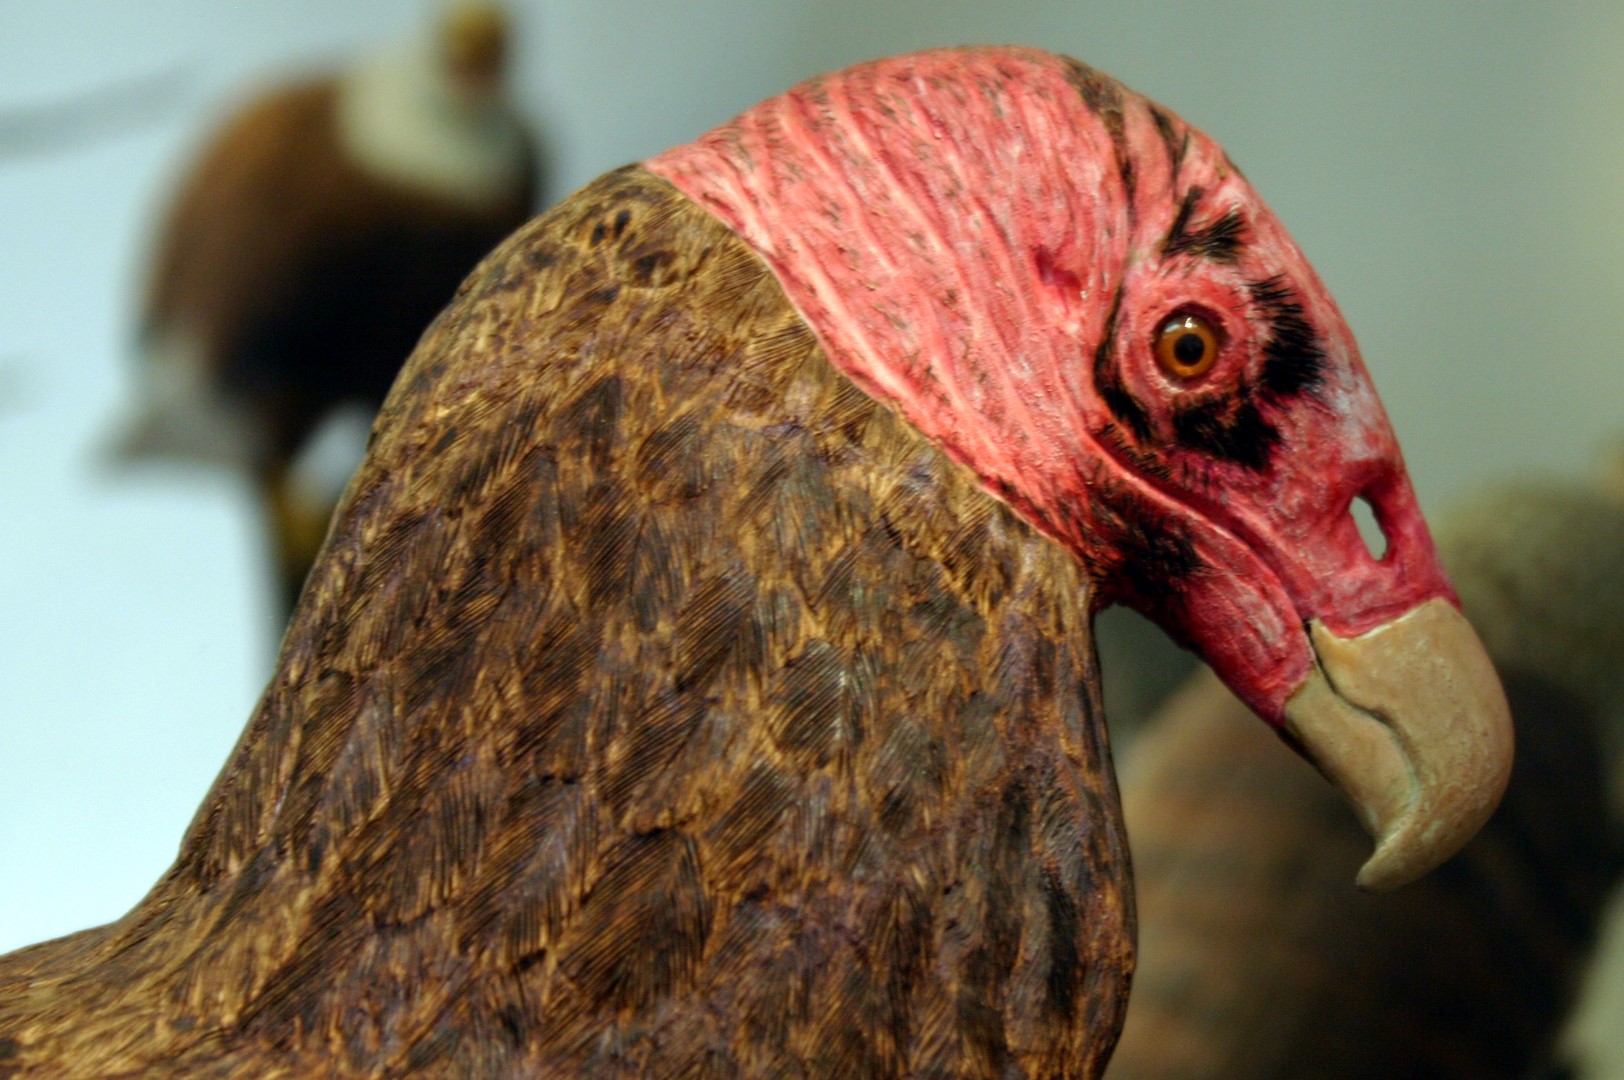 Head and neck of Turkey Vulture (Cathartes aura), a wood carving by Bob Spear (rest of body not visible in photo)